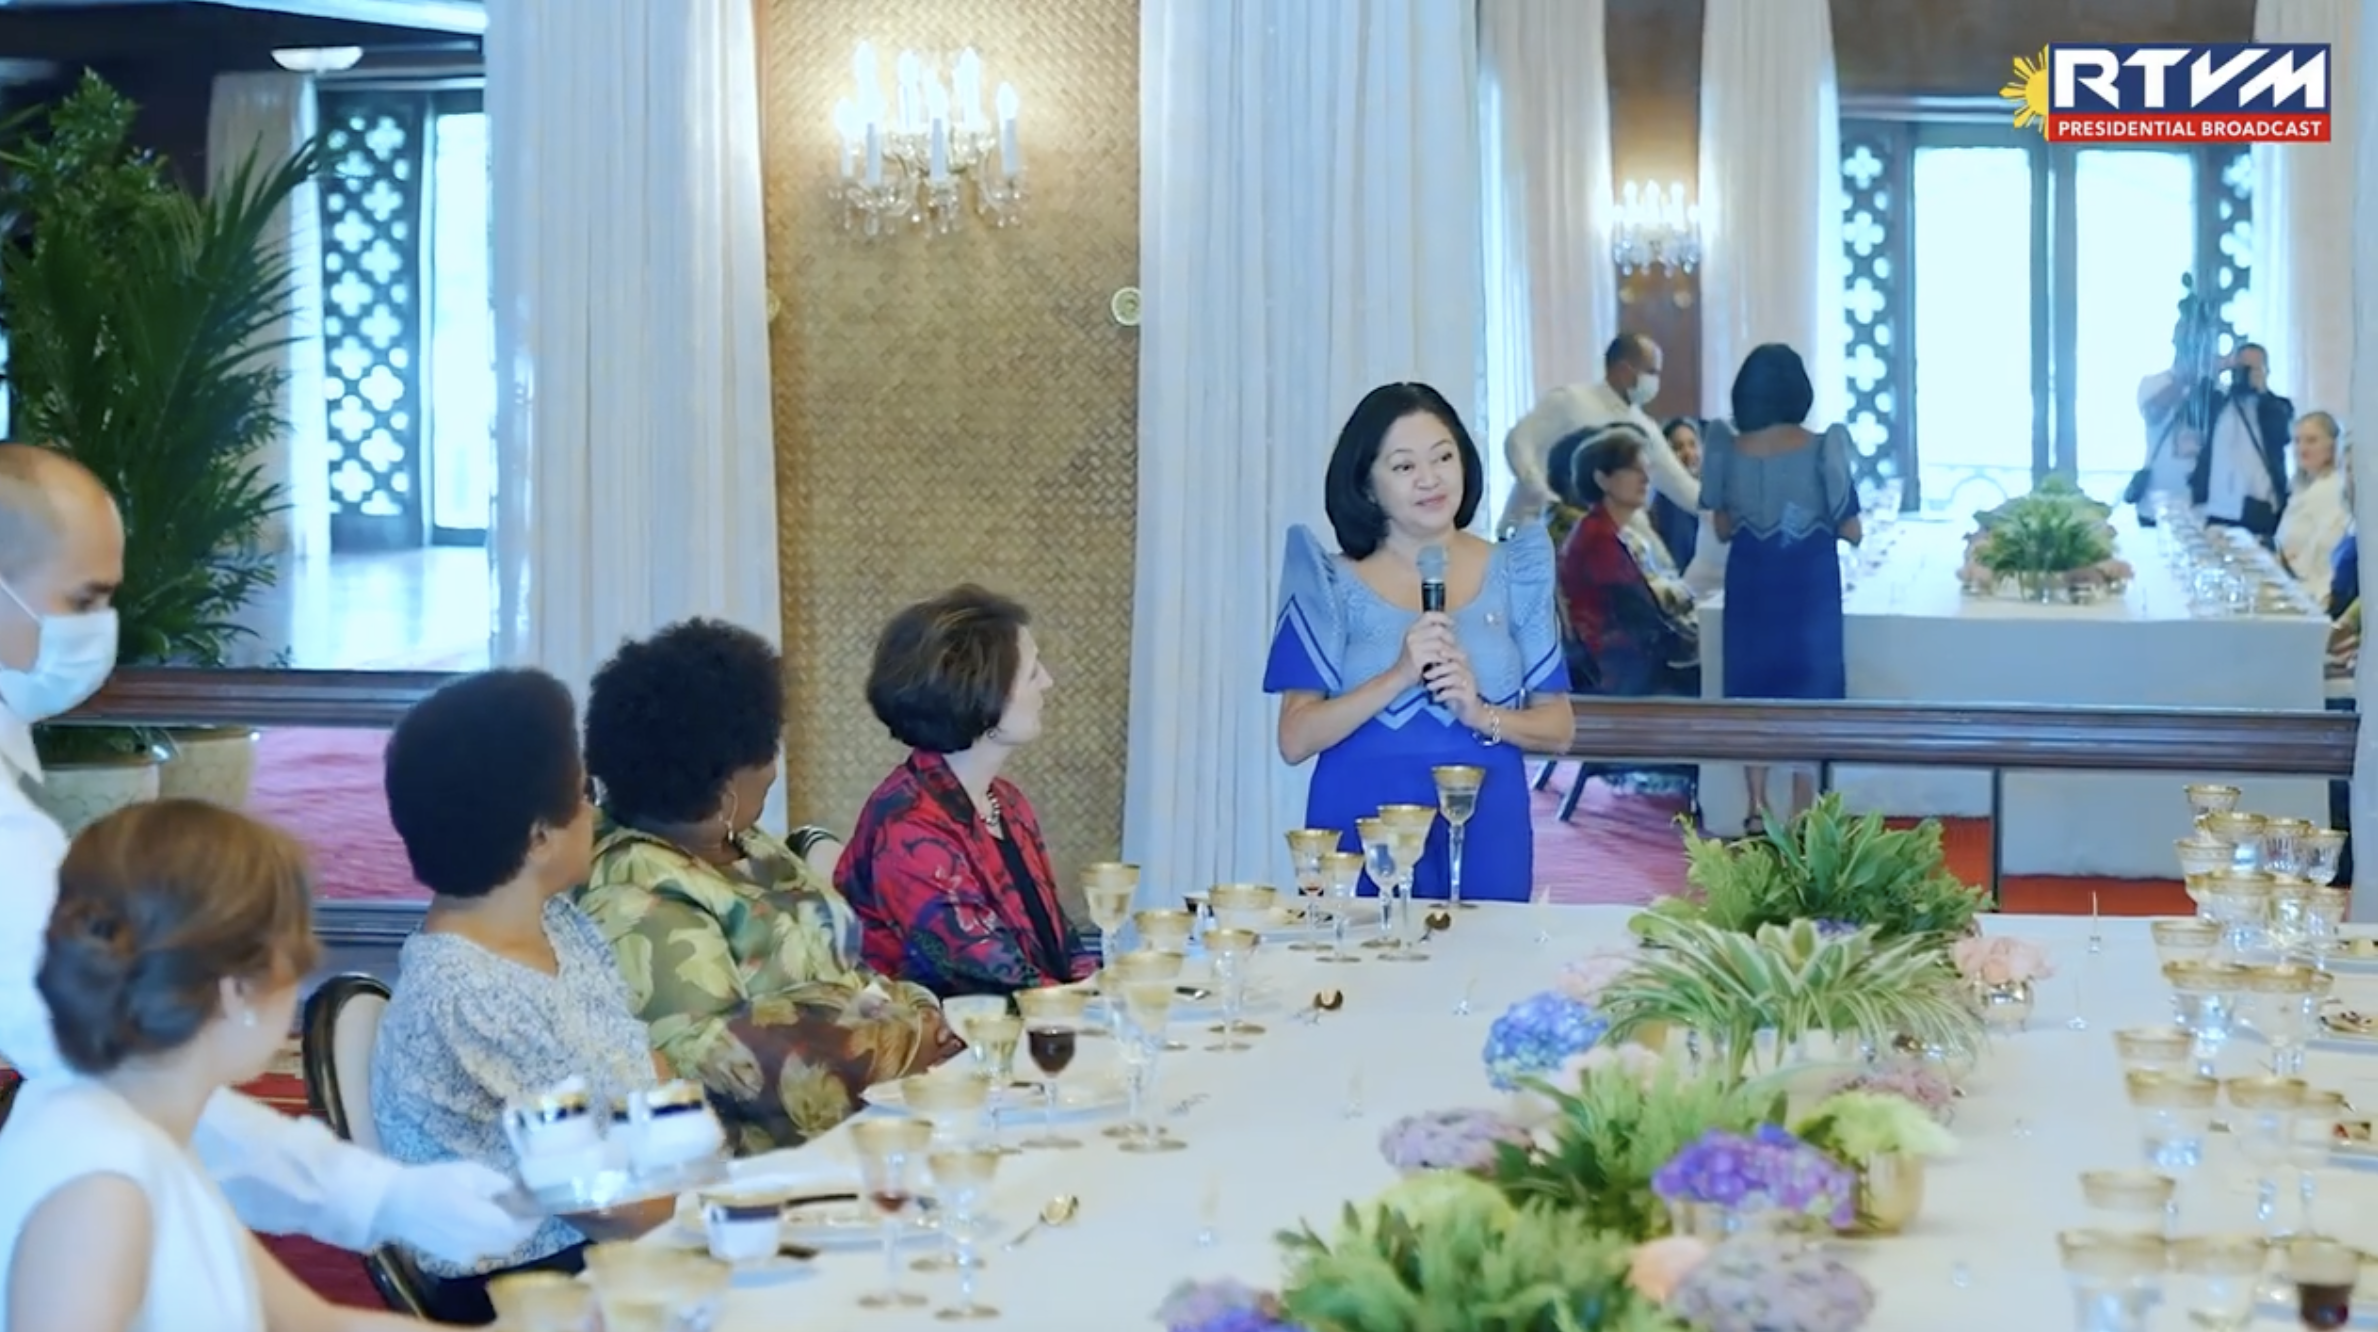 FL Marcos hosts luncheon for lady ambassadors